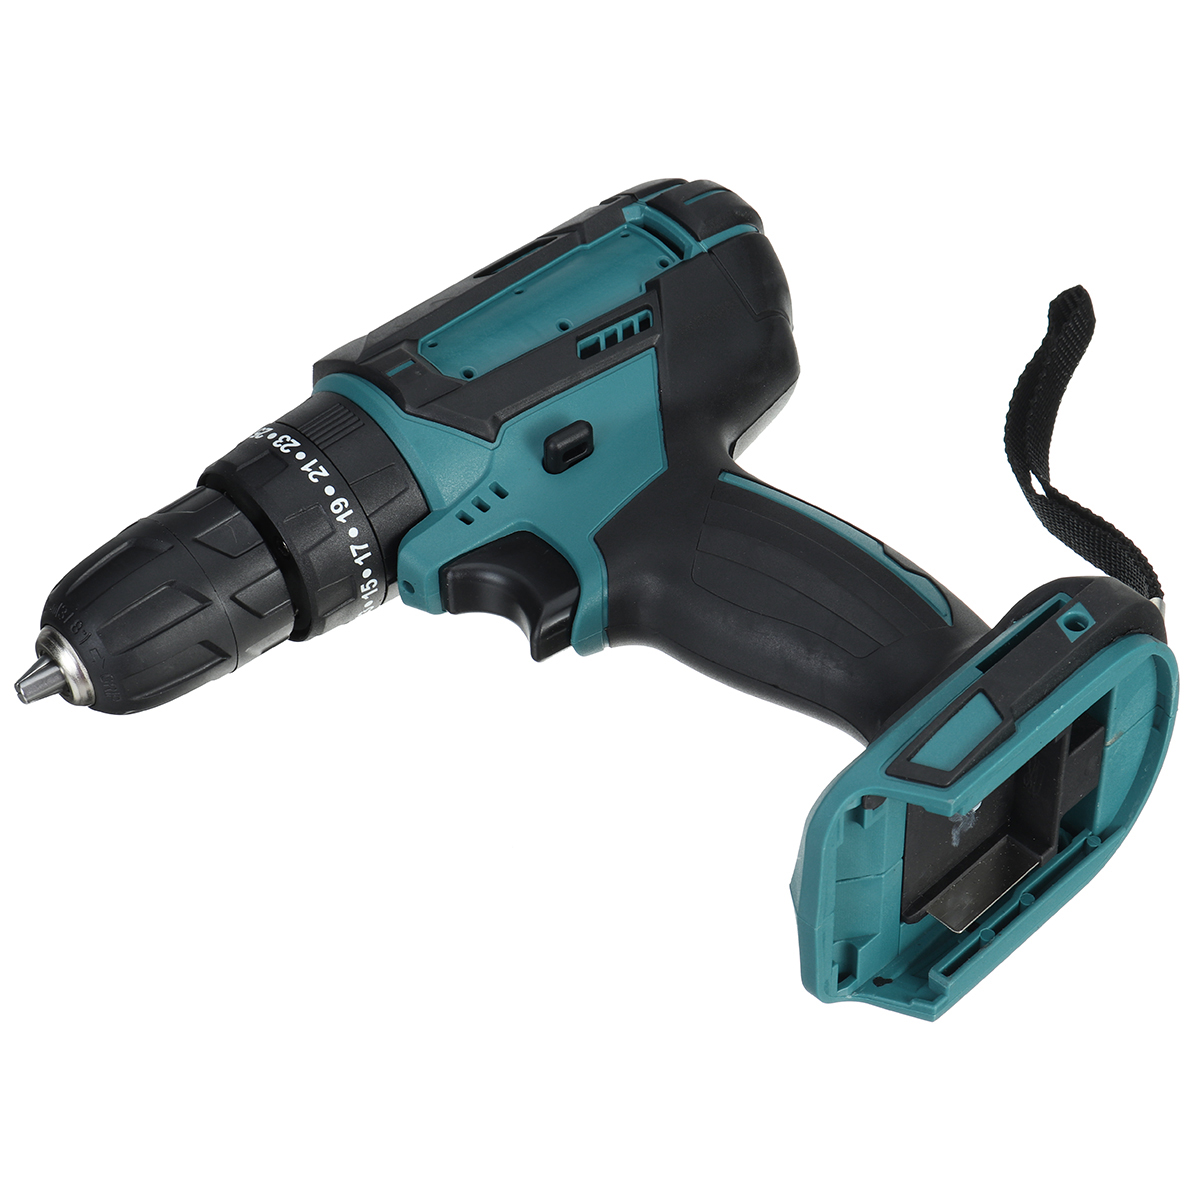 18V-Electric-Drill-Rechargeable-Screwdriver-Flat-Drill-Impact-Wrench-w-None-or-1pc-or-2pcs-Battery-1798111-13